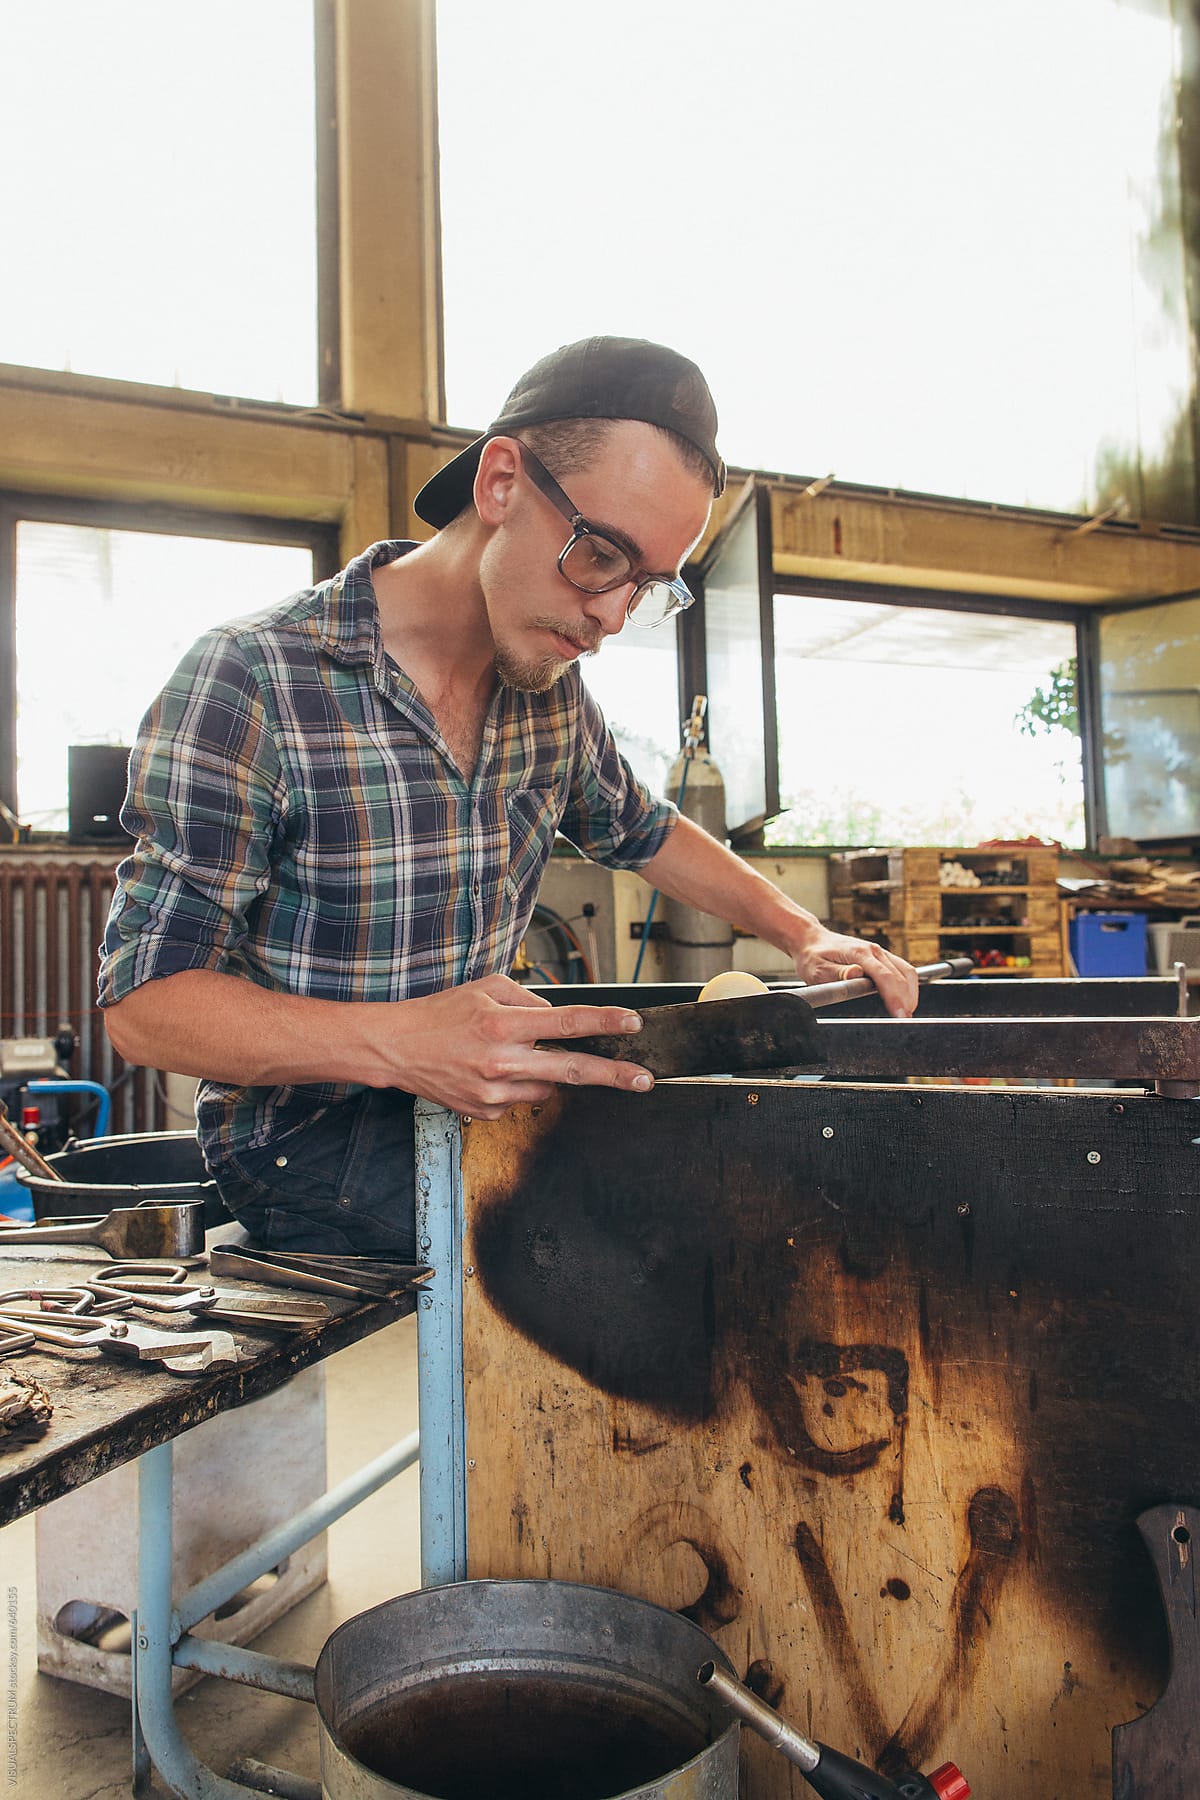 Artisan Glass Workshop - Portrait of Male Hipster Glass Artist Shaping Hot Glass With Metal Spatula